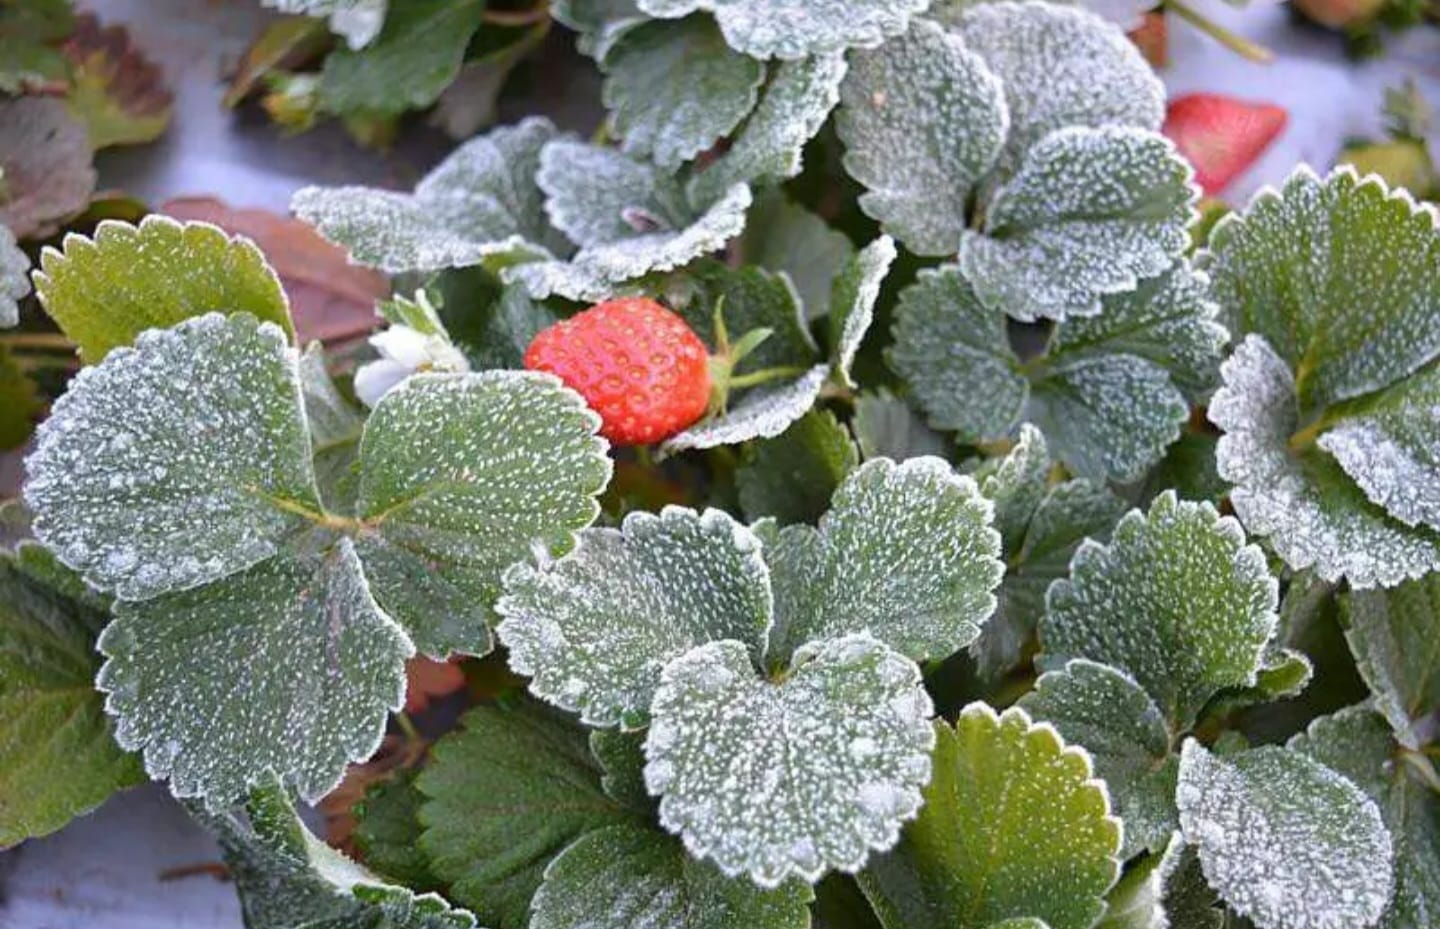 Cold frosts in Mahabaleshwar; In the morning the temperature dropped to 5 degrees